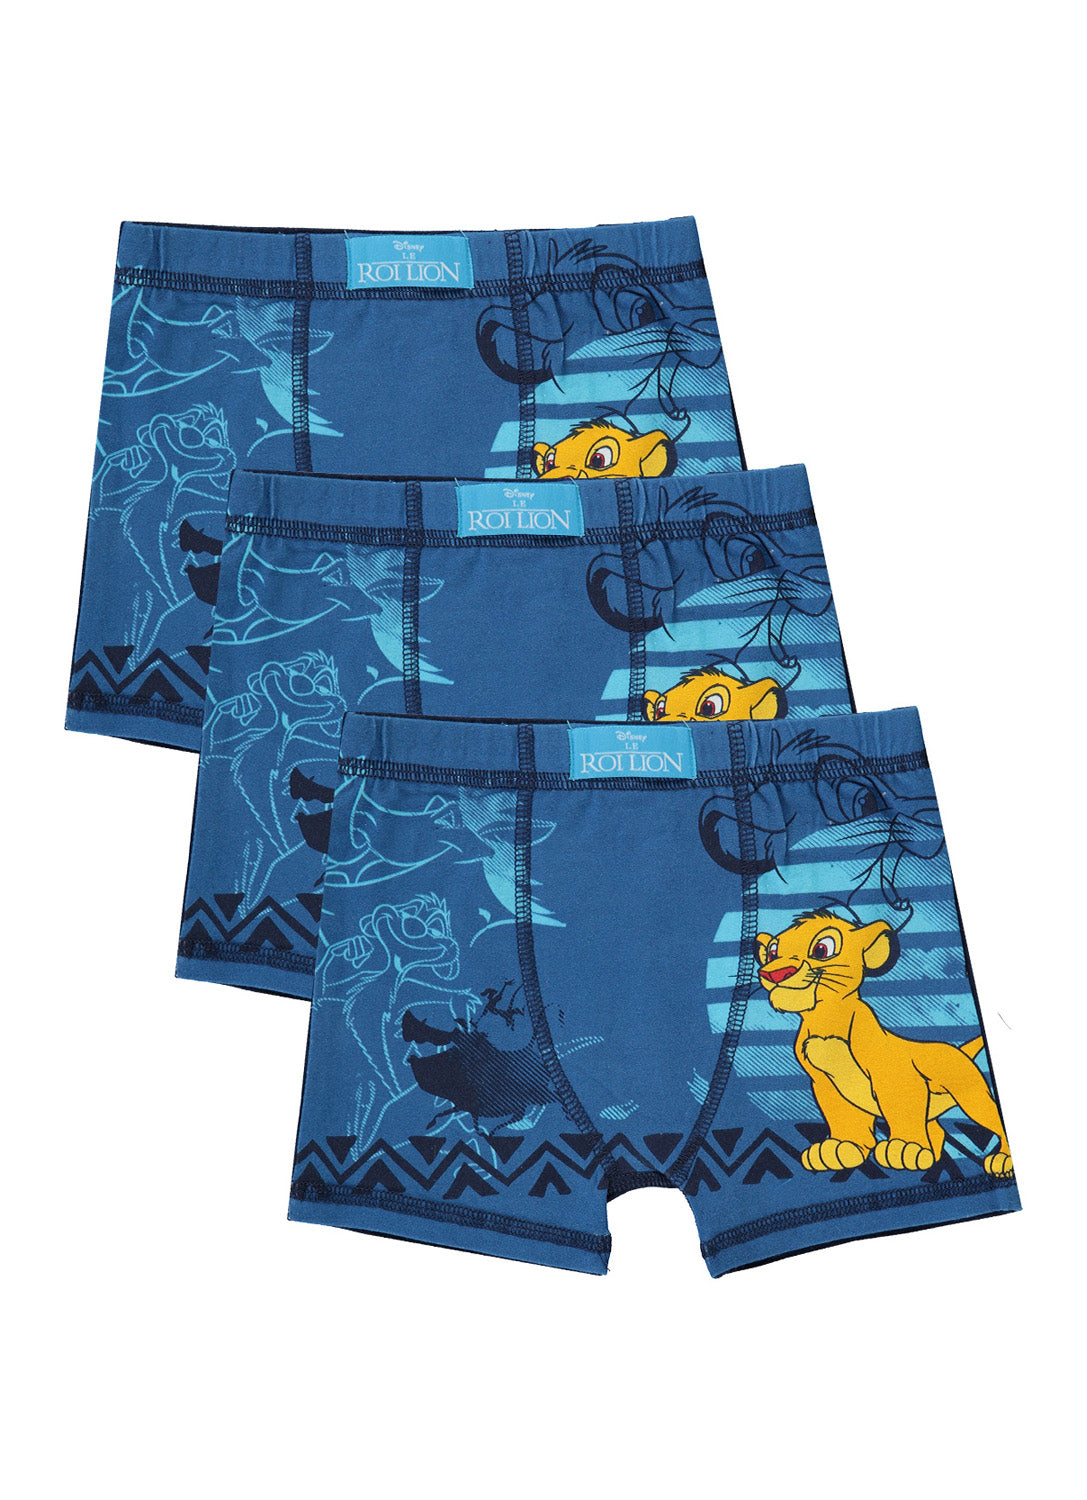 3 Underwear boxers for Boys with Lion King prints